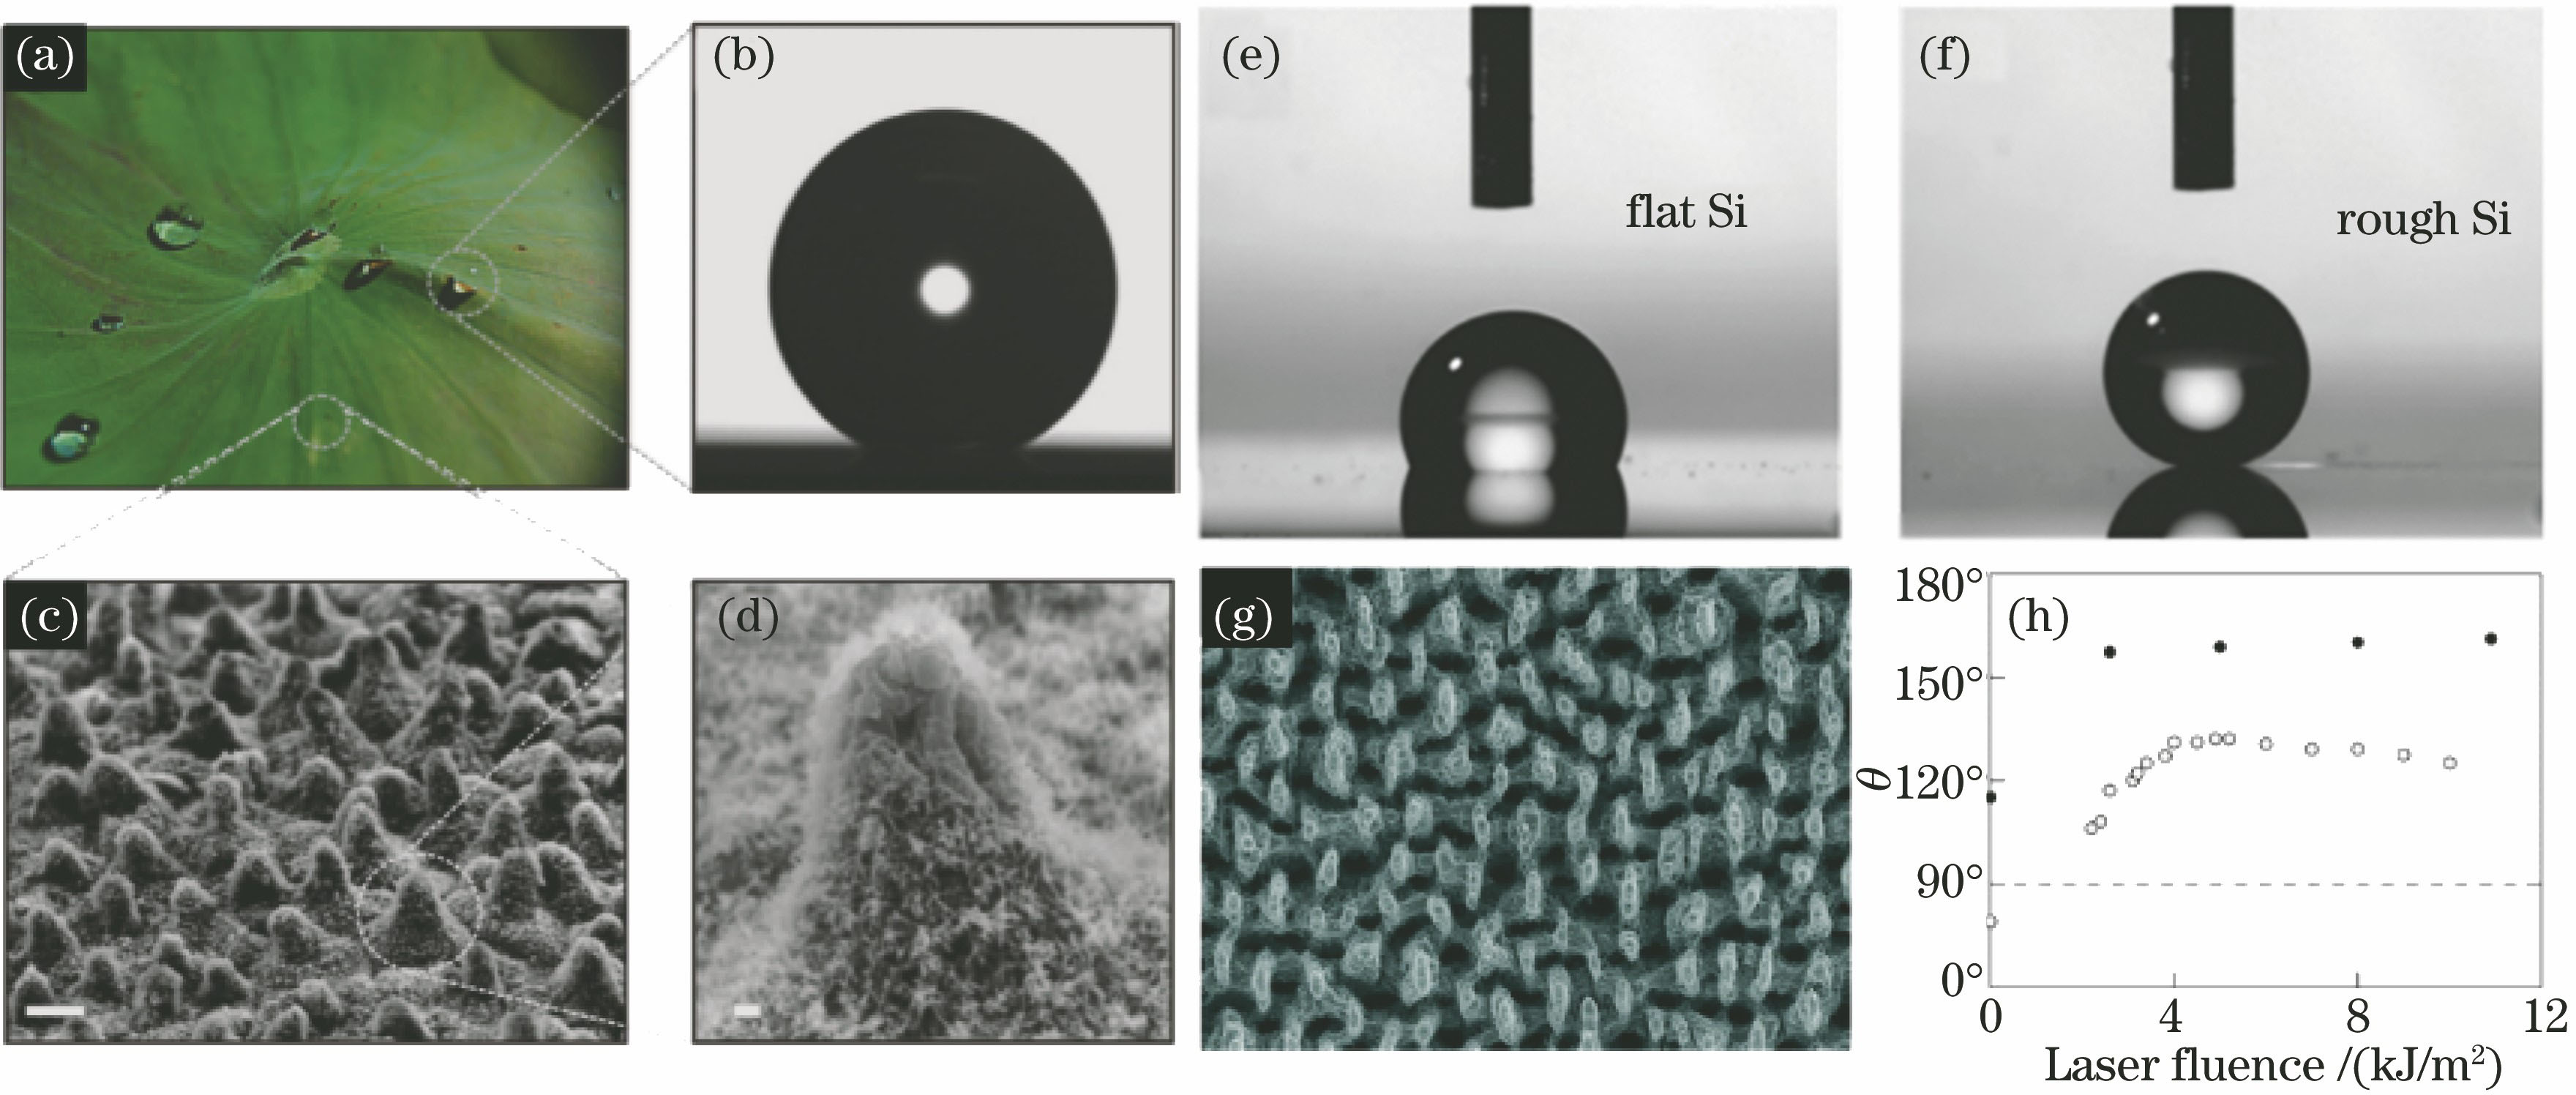 Superhydrophobicity of lotus leaf. (a) Lotus leaf; (b) water droplet on lotus leaf; (c)(d) scanning electron microscope (SEM) images of lotus leaf[1](superhydrophobic silicon fabricated by femtosecond laser); water droplet on (e) flat Si and (f) rough Si; (g) SEM images of femtosecond laser irradiated Si surface; (h) relationship between contact angle and laser fluence[57]